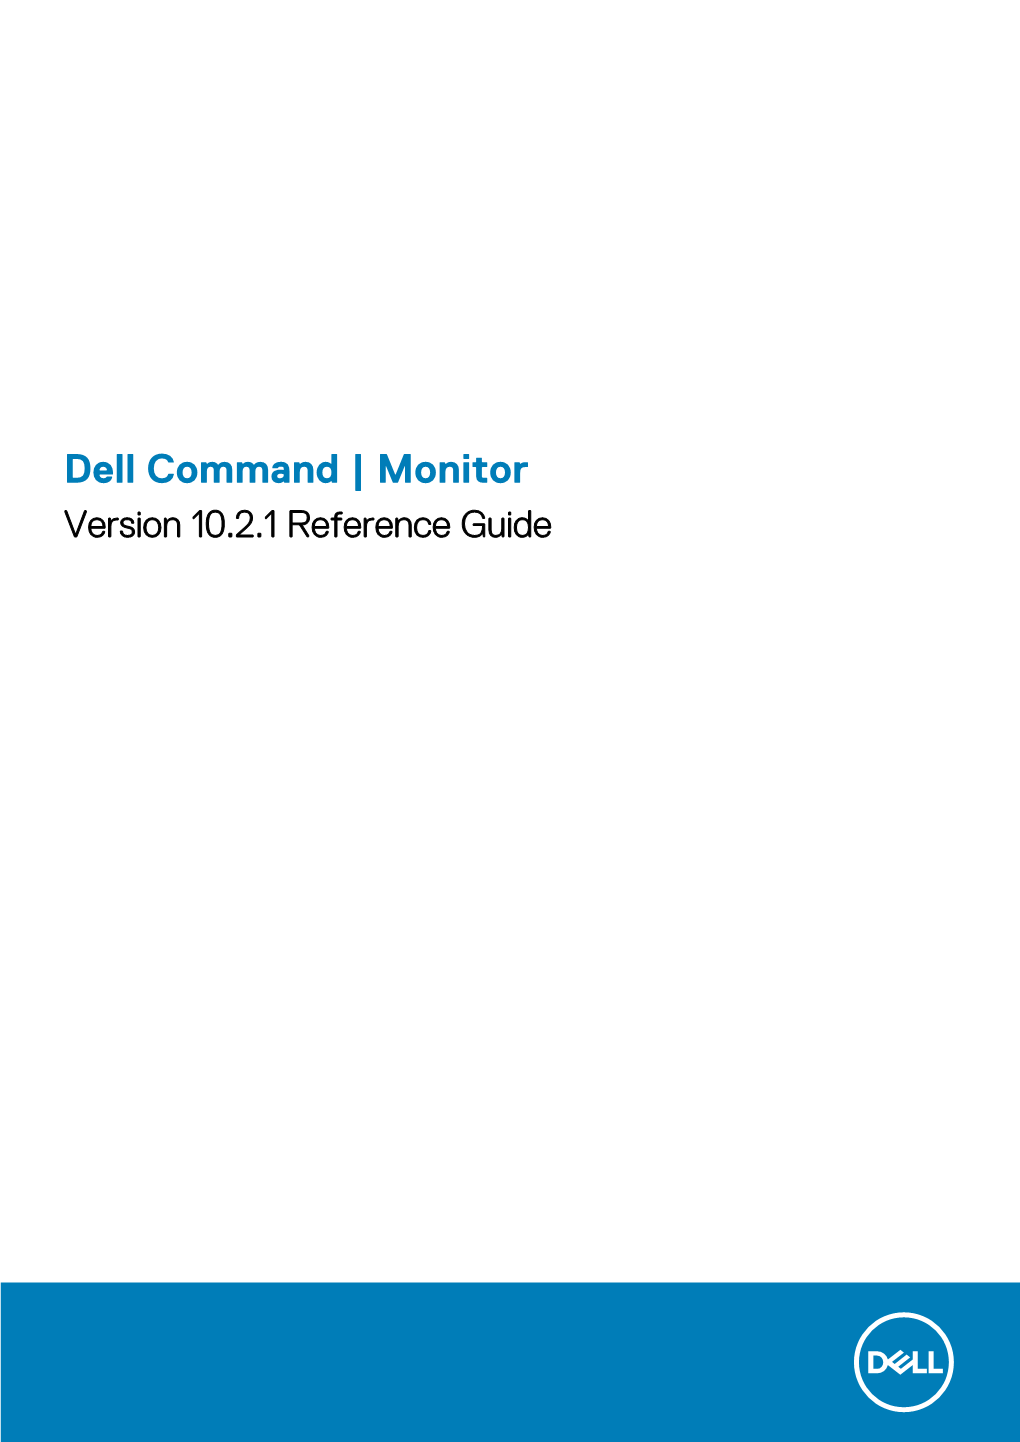 Dell Command | Monitor Version 10.2.1 Reference Guide Remarques, Précautions Et Avertissements